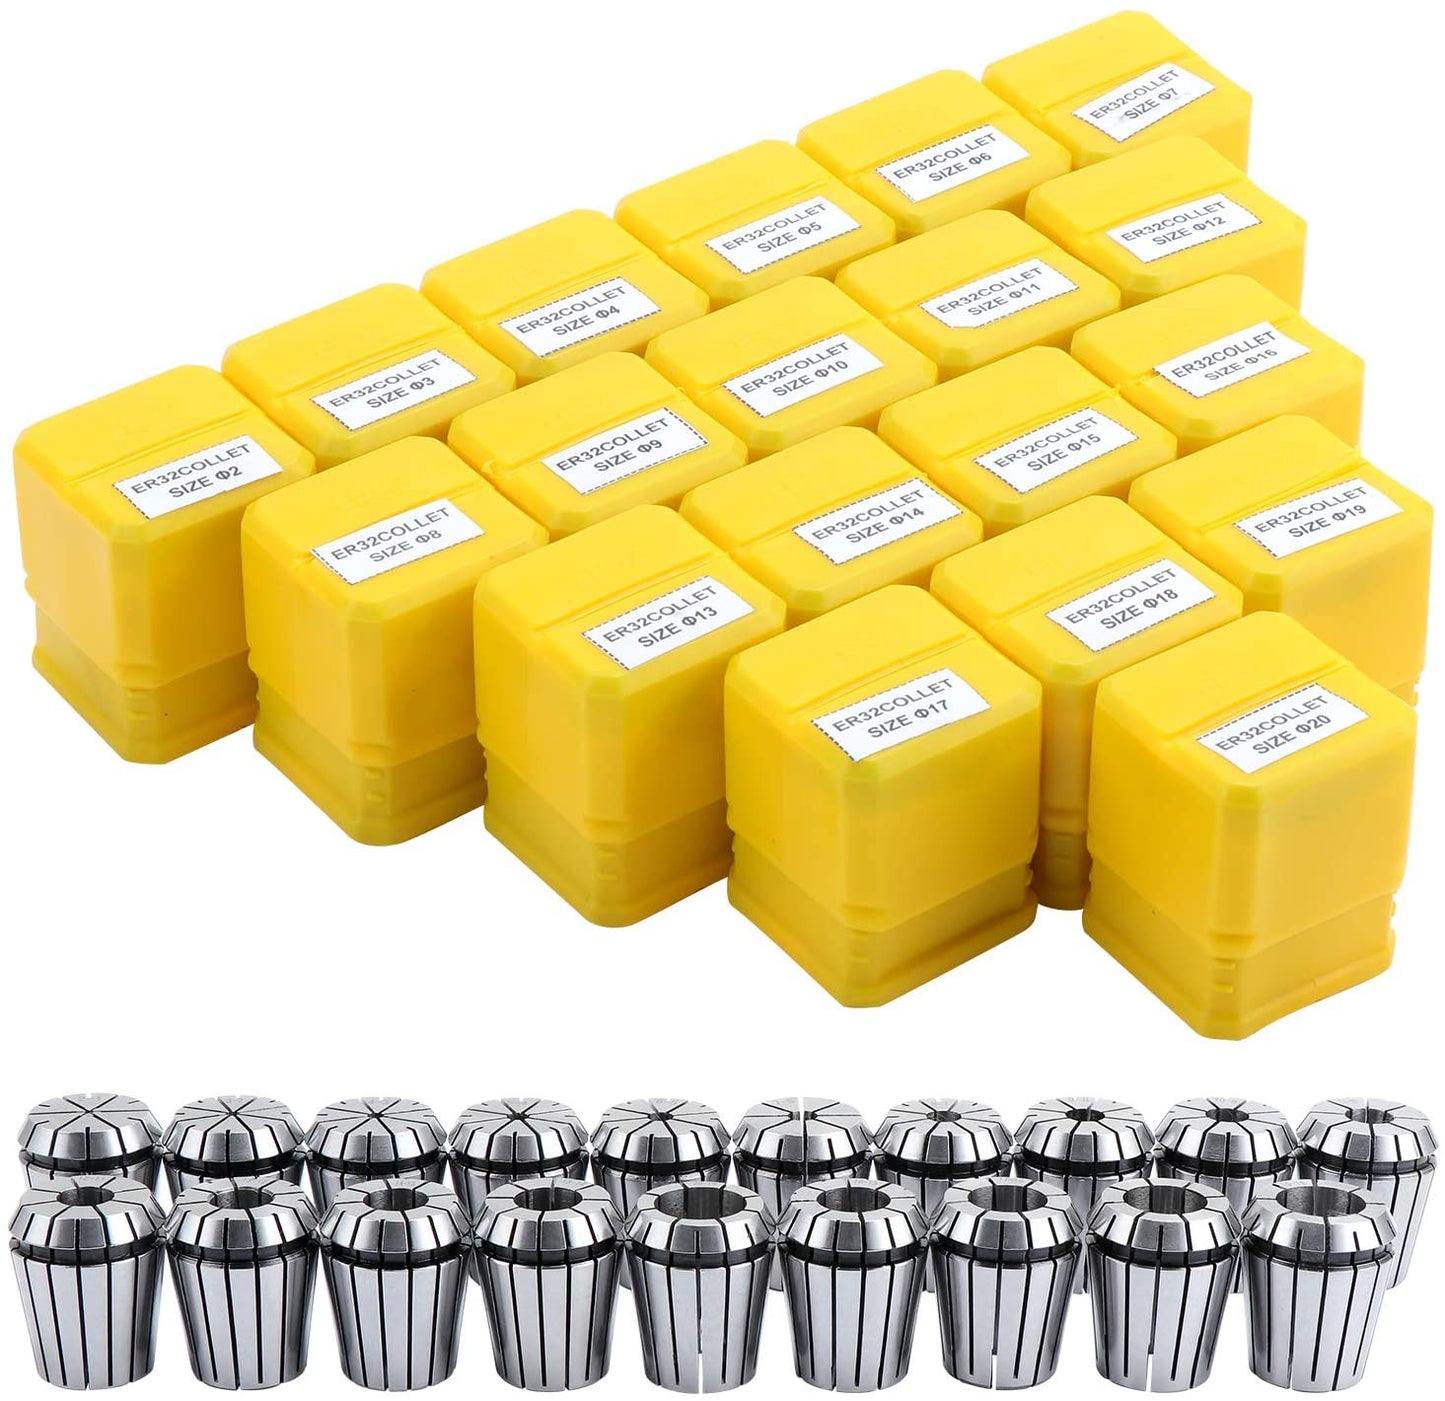 findmall ER32 Collet Set 19Pcs ER32 Collet Chuck Spring Collet Set CNC Engraving Milling Lathe Chuck Tool 2-20MM Fit for CNC Engraving Machine and Milling Lathe Tool FINDMALLPARTS